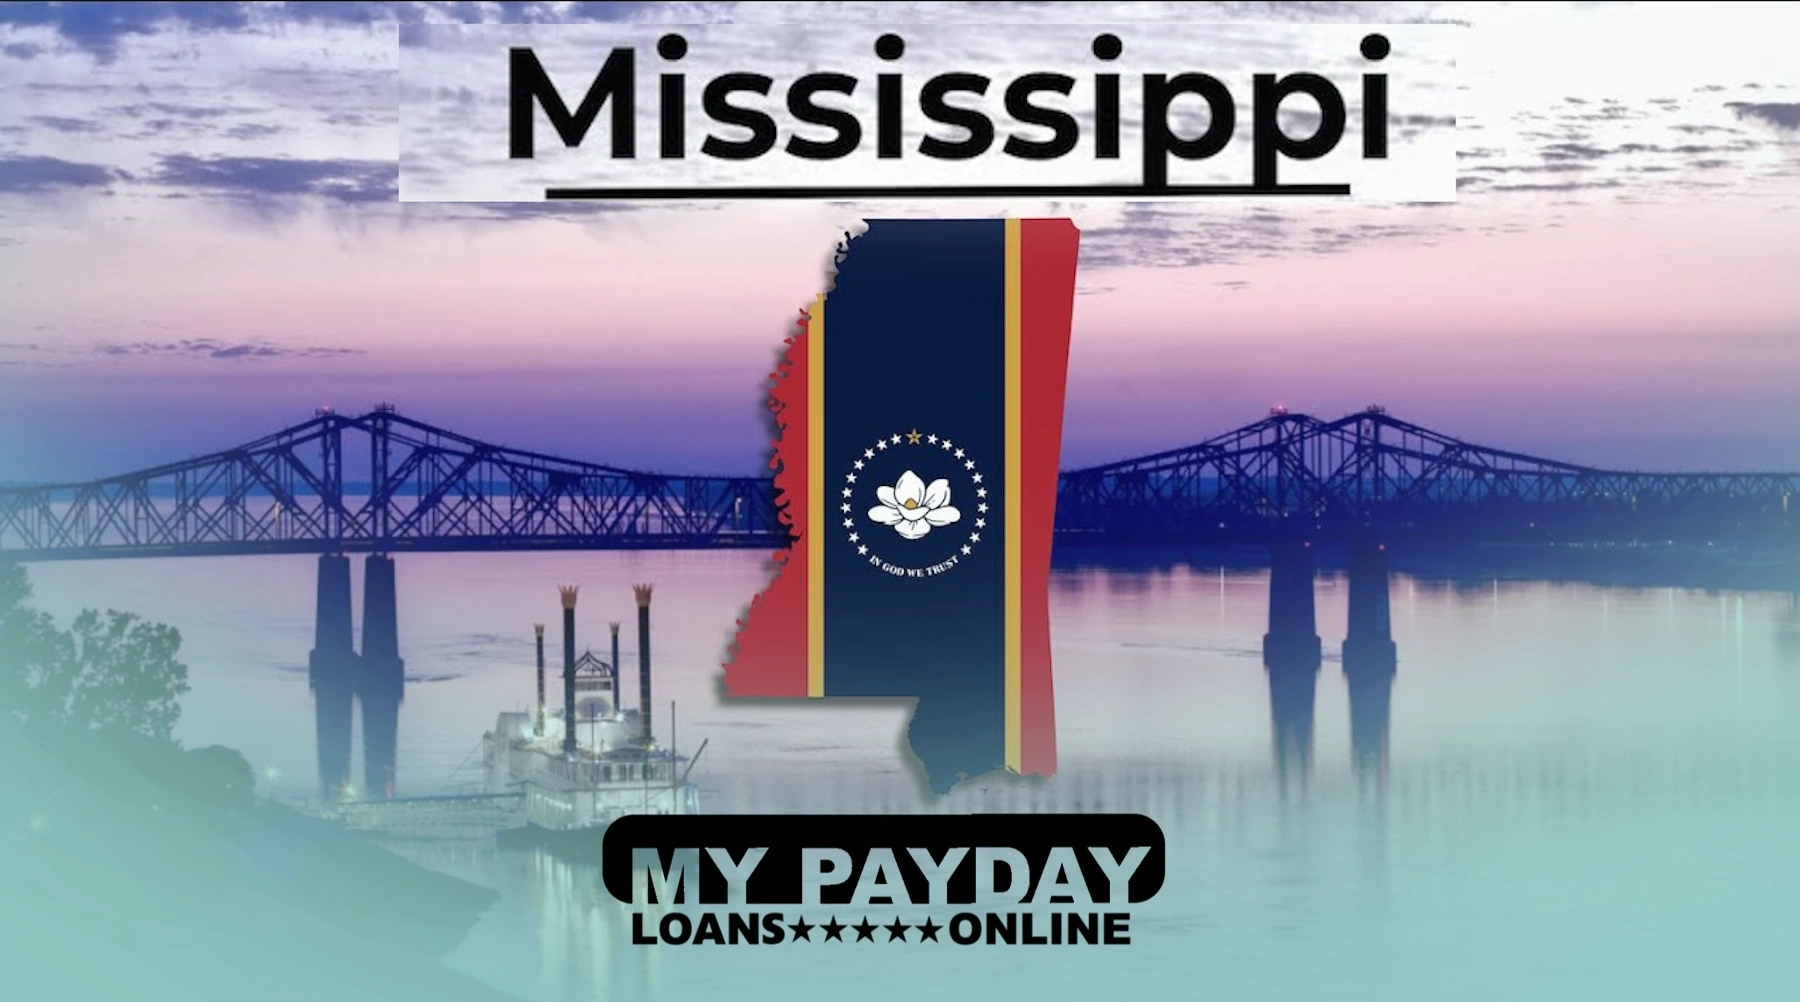 Missisippi Payday Loans